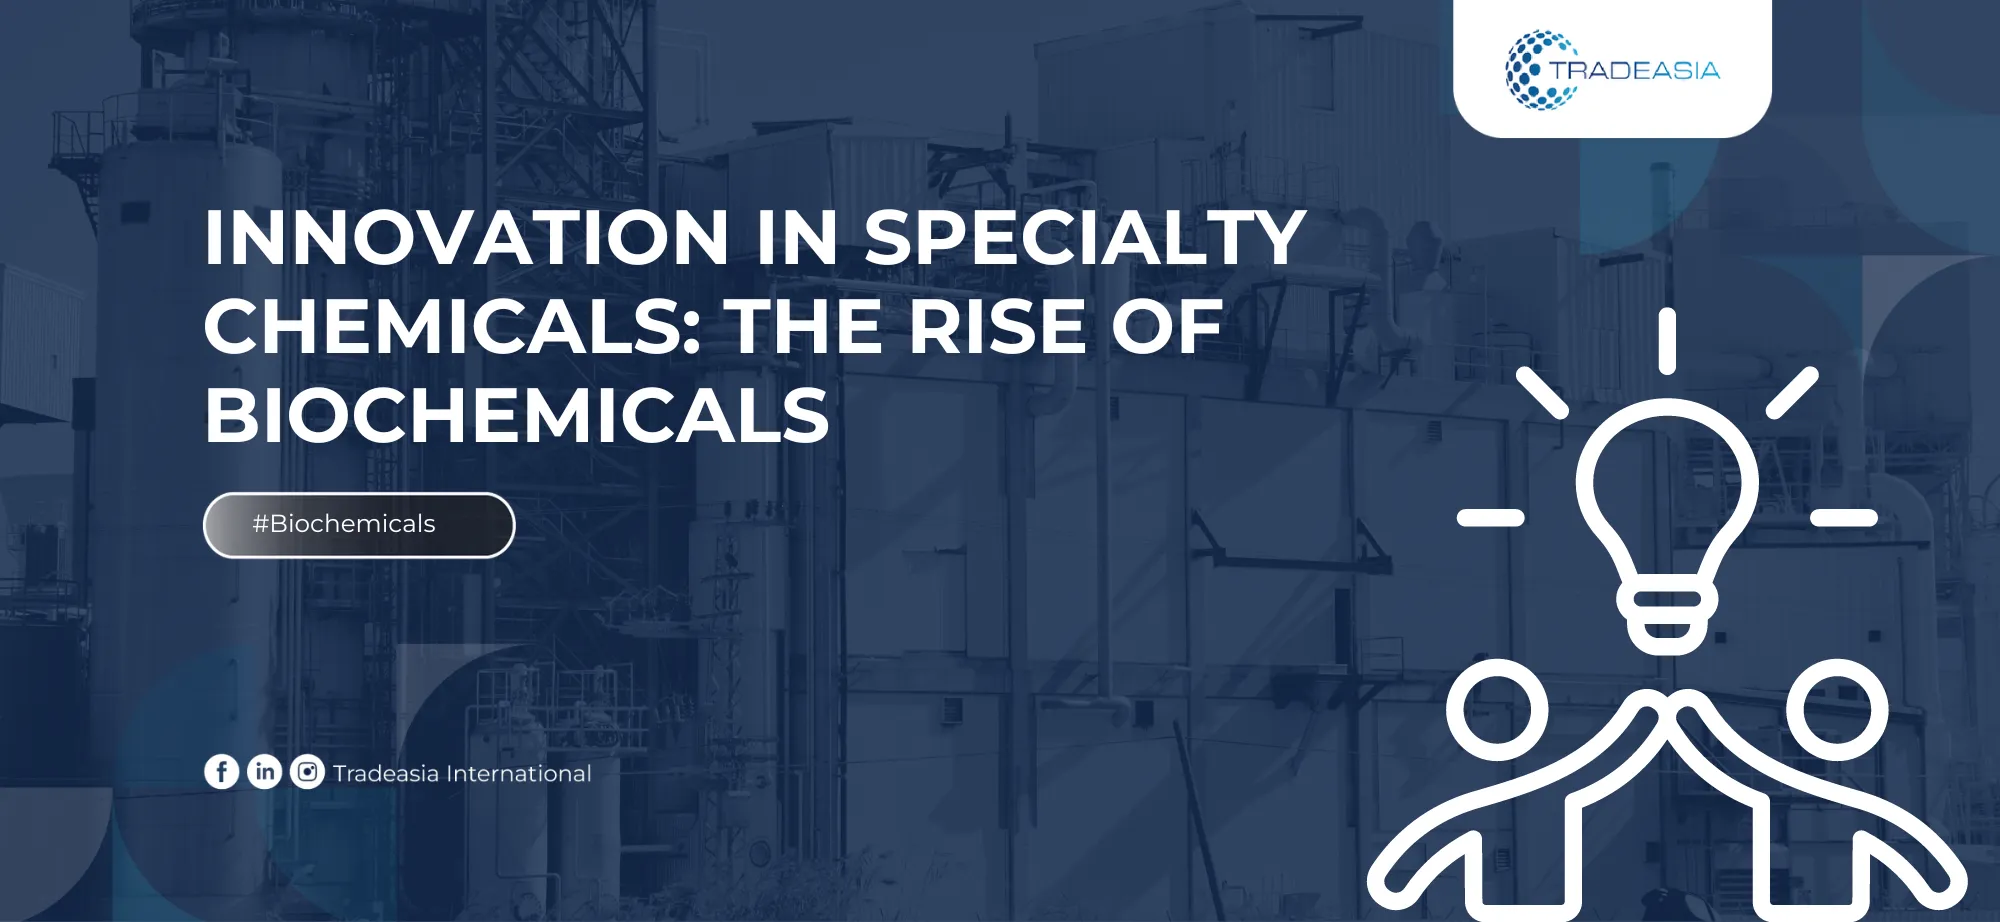 Innovation in Specialty Chemicals: The Rise of Biochemicals